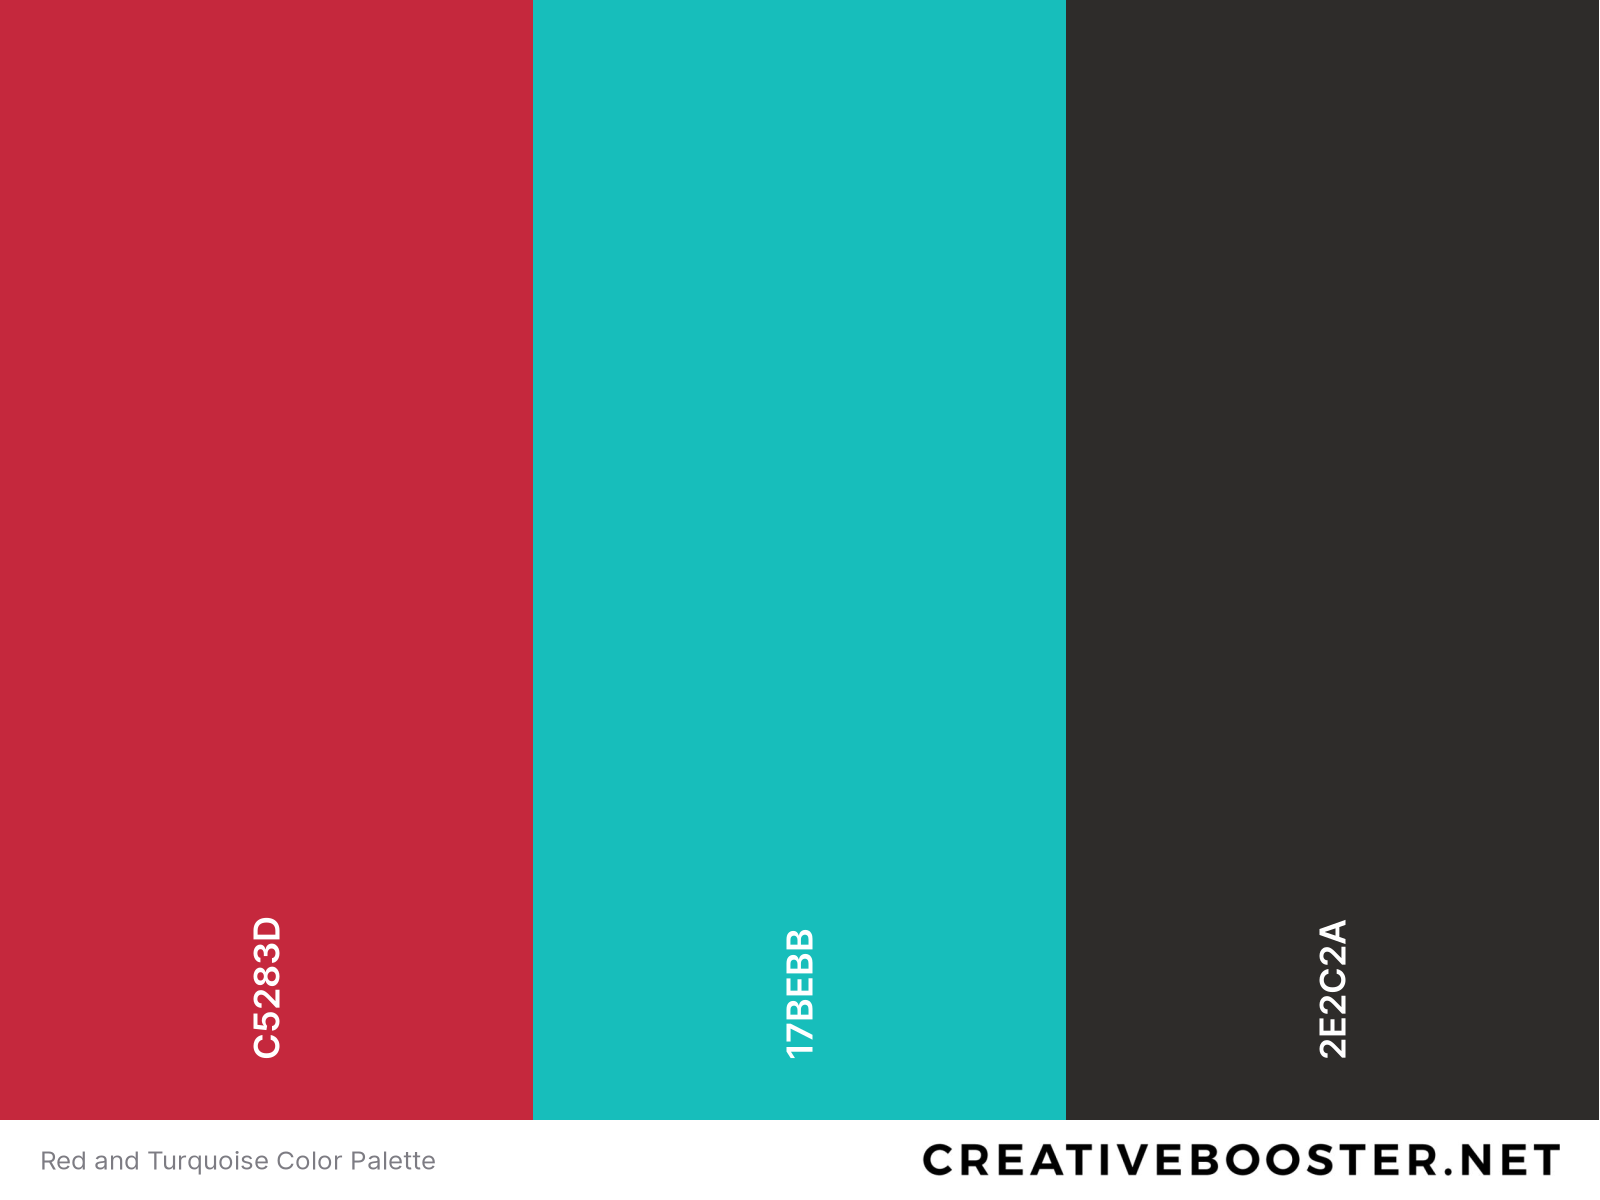 Red and Turquoise Color Palette